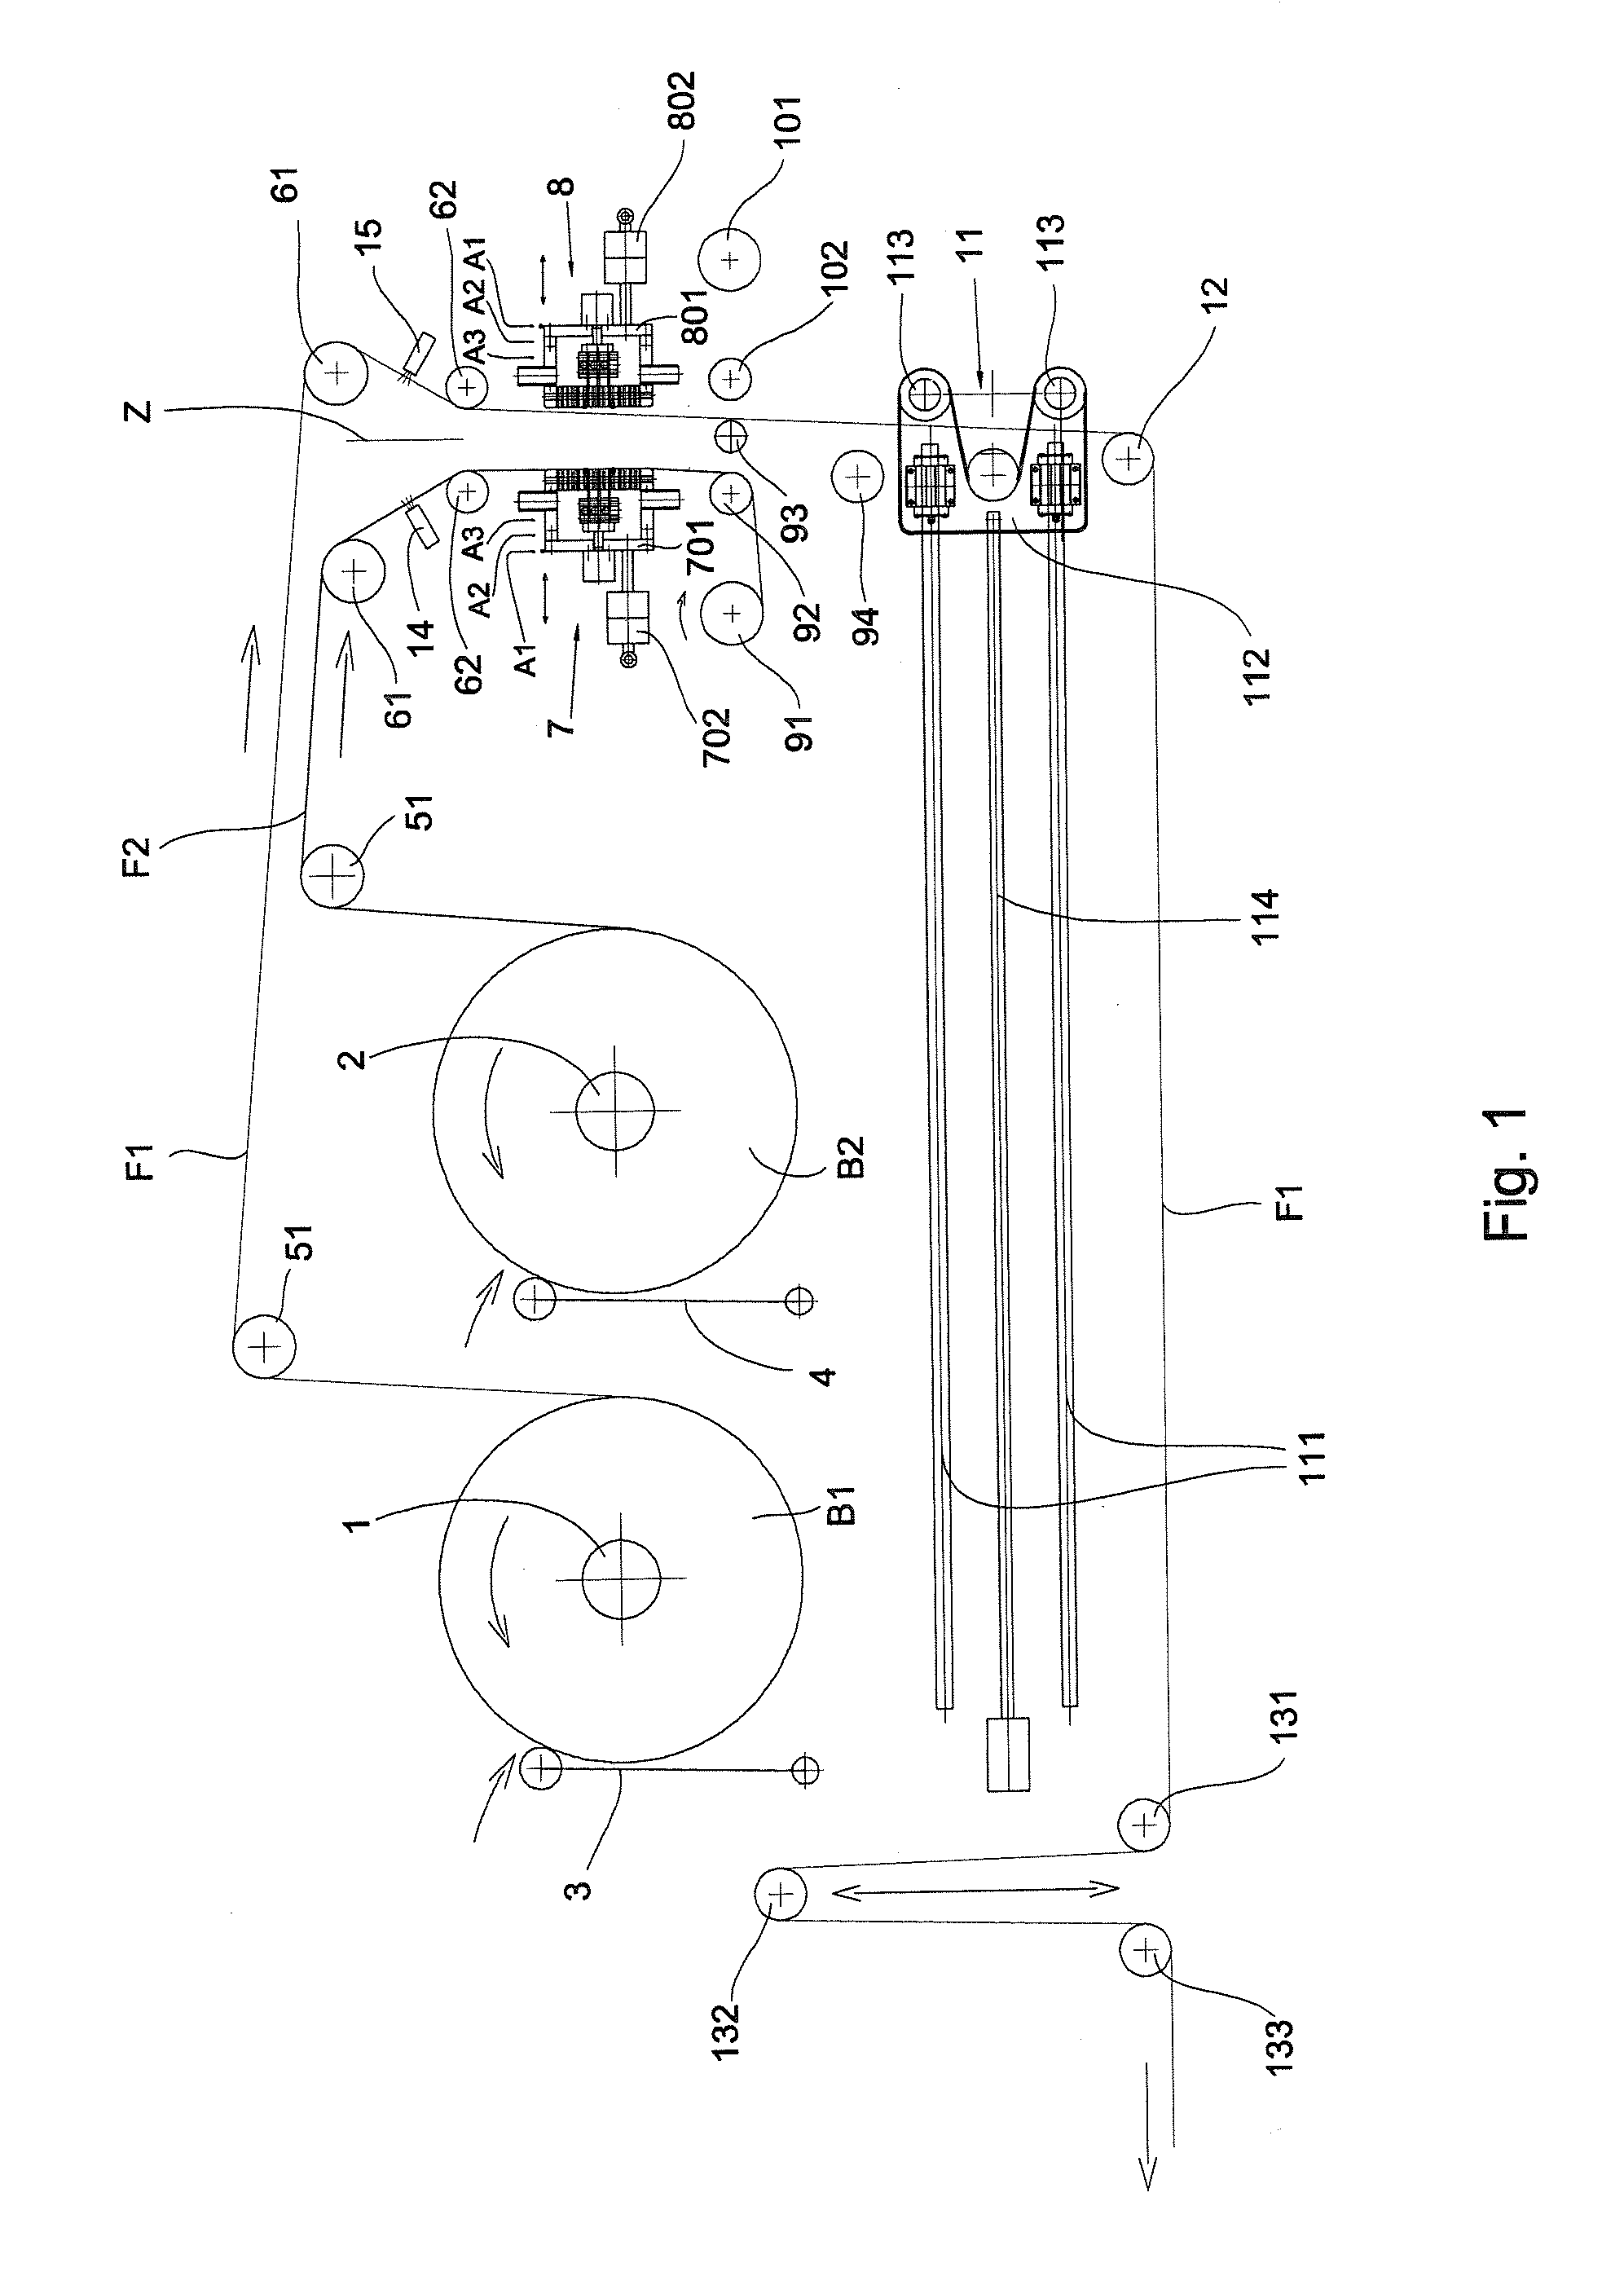 Unit and method for feeding reels of a sheet-like material, in particular but not exclusively a printed plastic film with print-position marks for automatic packaging machines